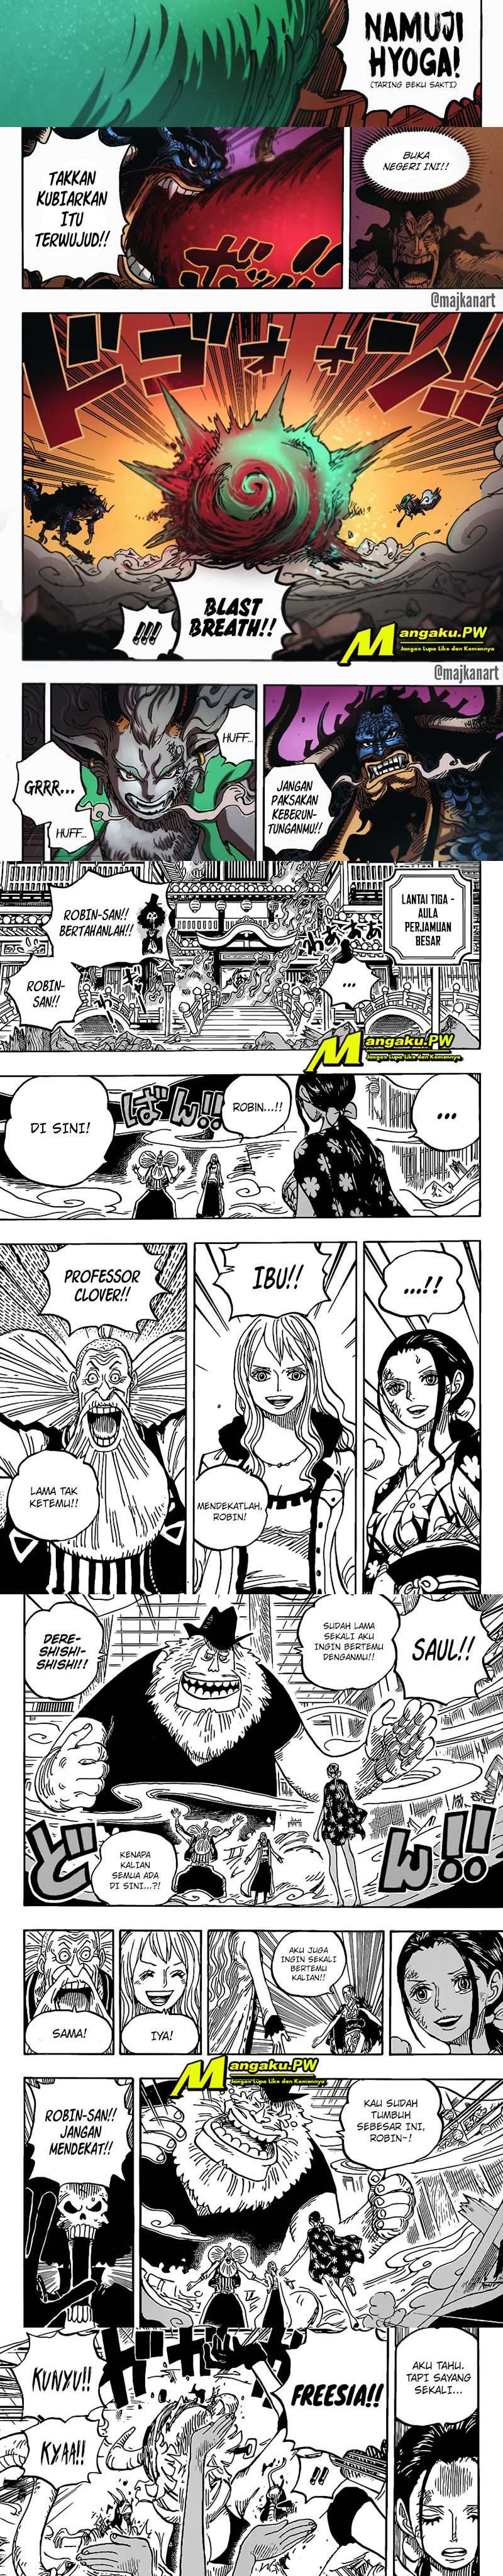 One Piece Chapter 1020 HQ Image 1